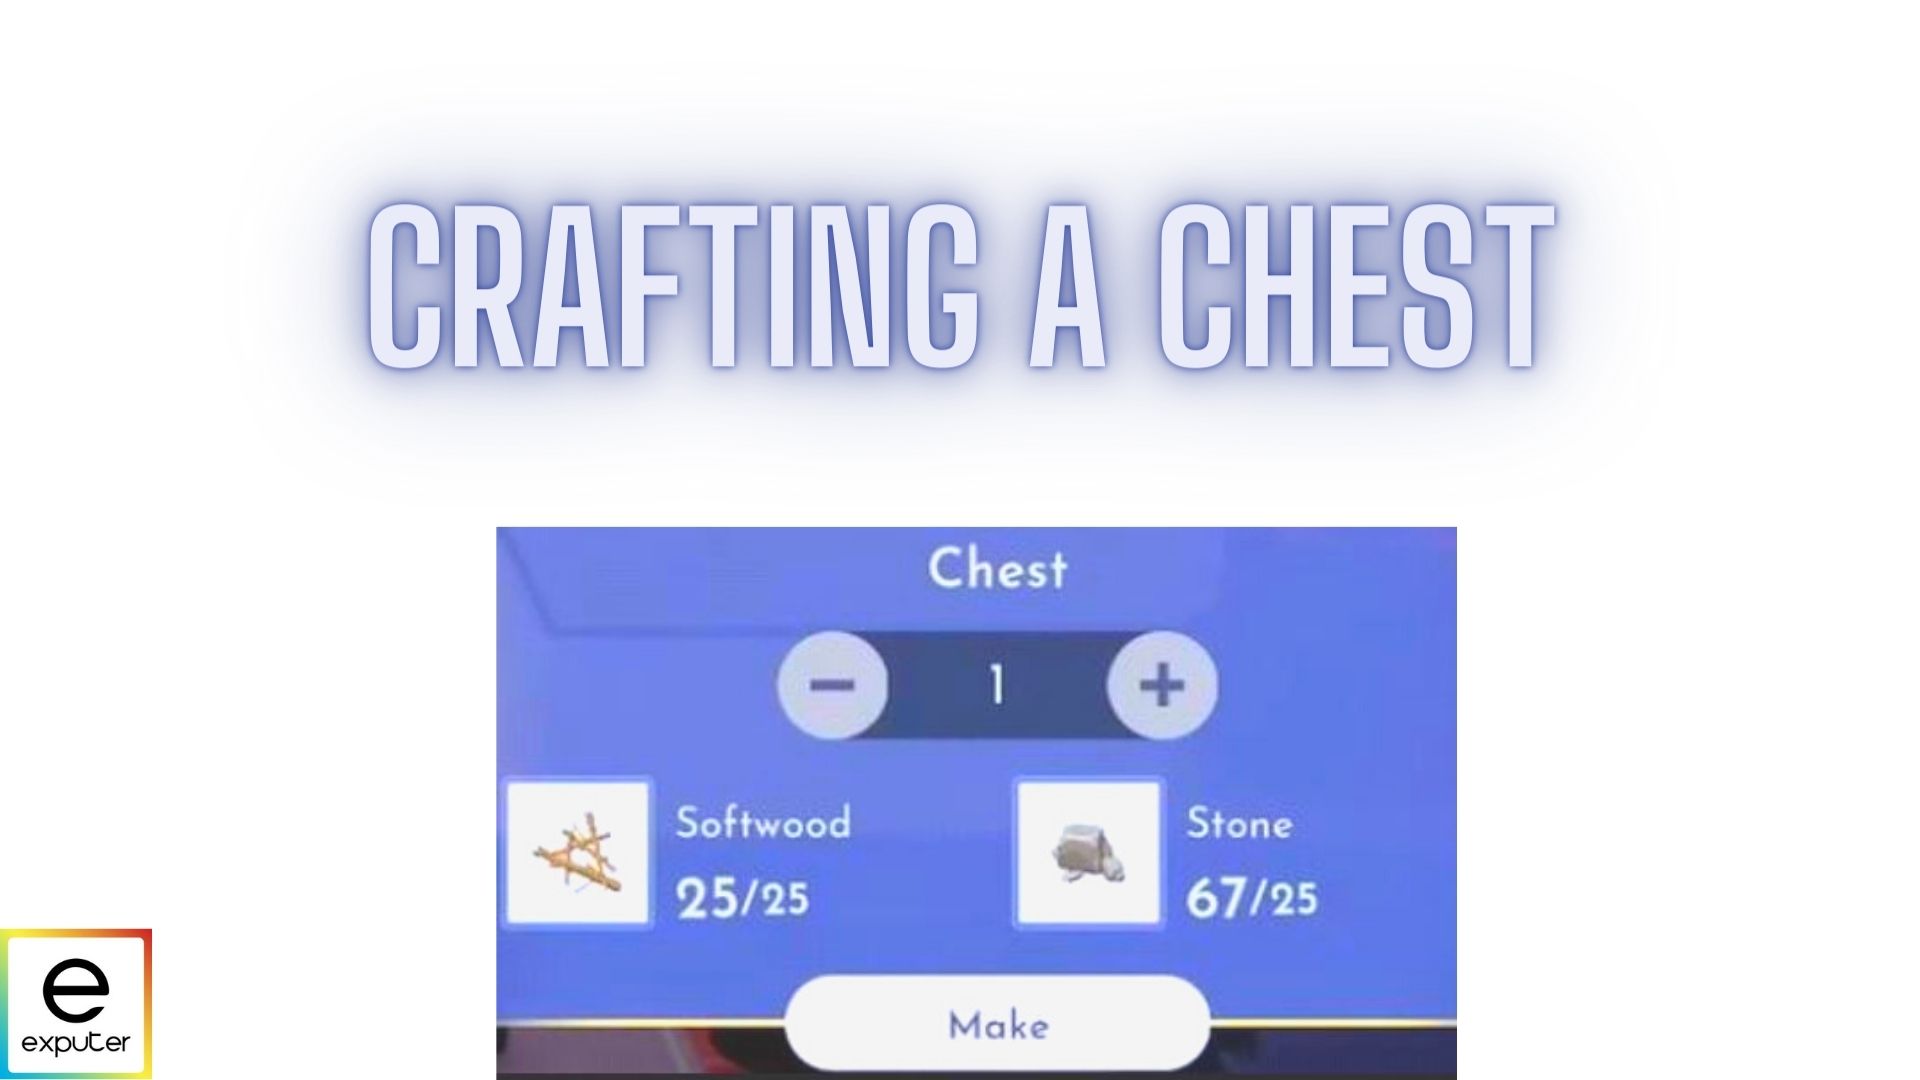 Crafting a chest and upgrading it in Disney Dreamlight Valley Full Method on How To Do That Procedure